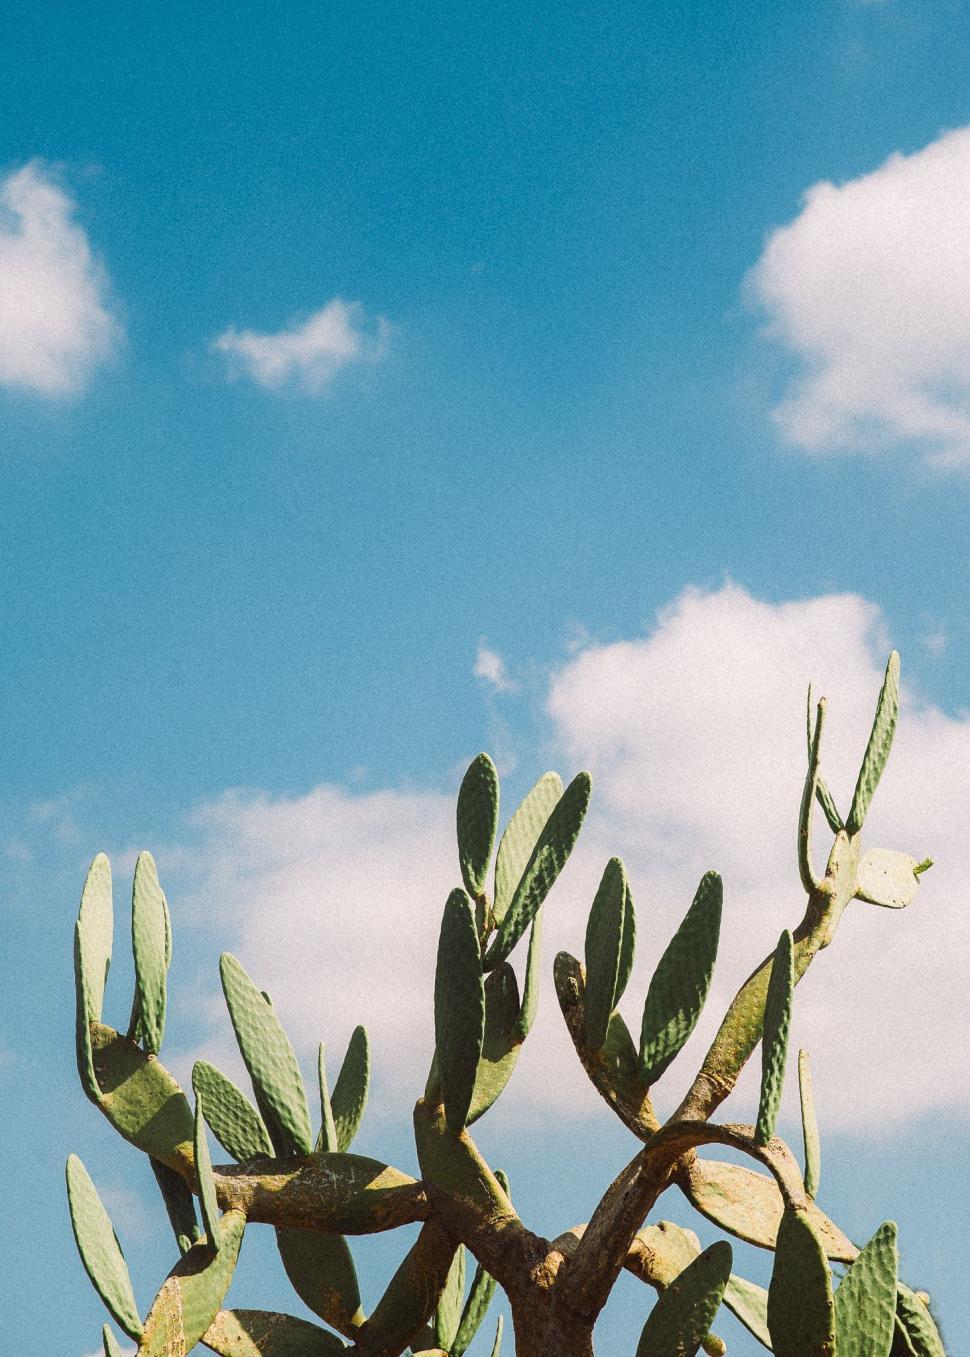 Free Image of Cactus Plant Against Blue Sky 